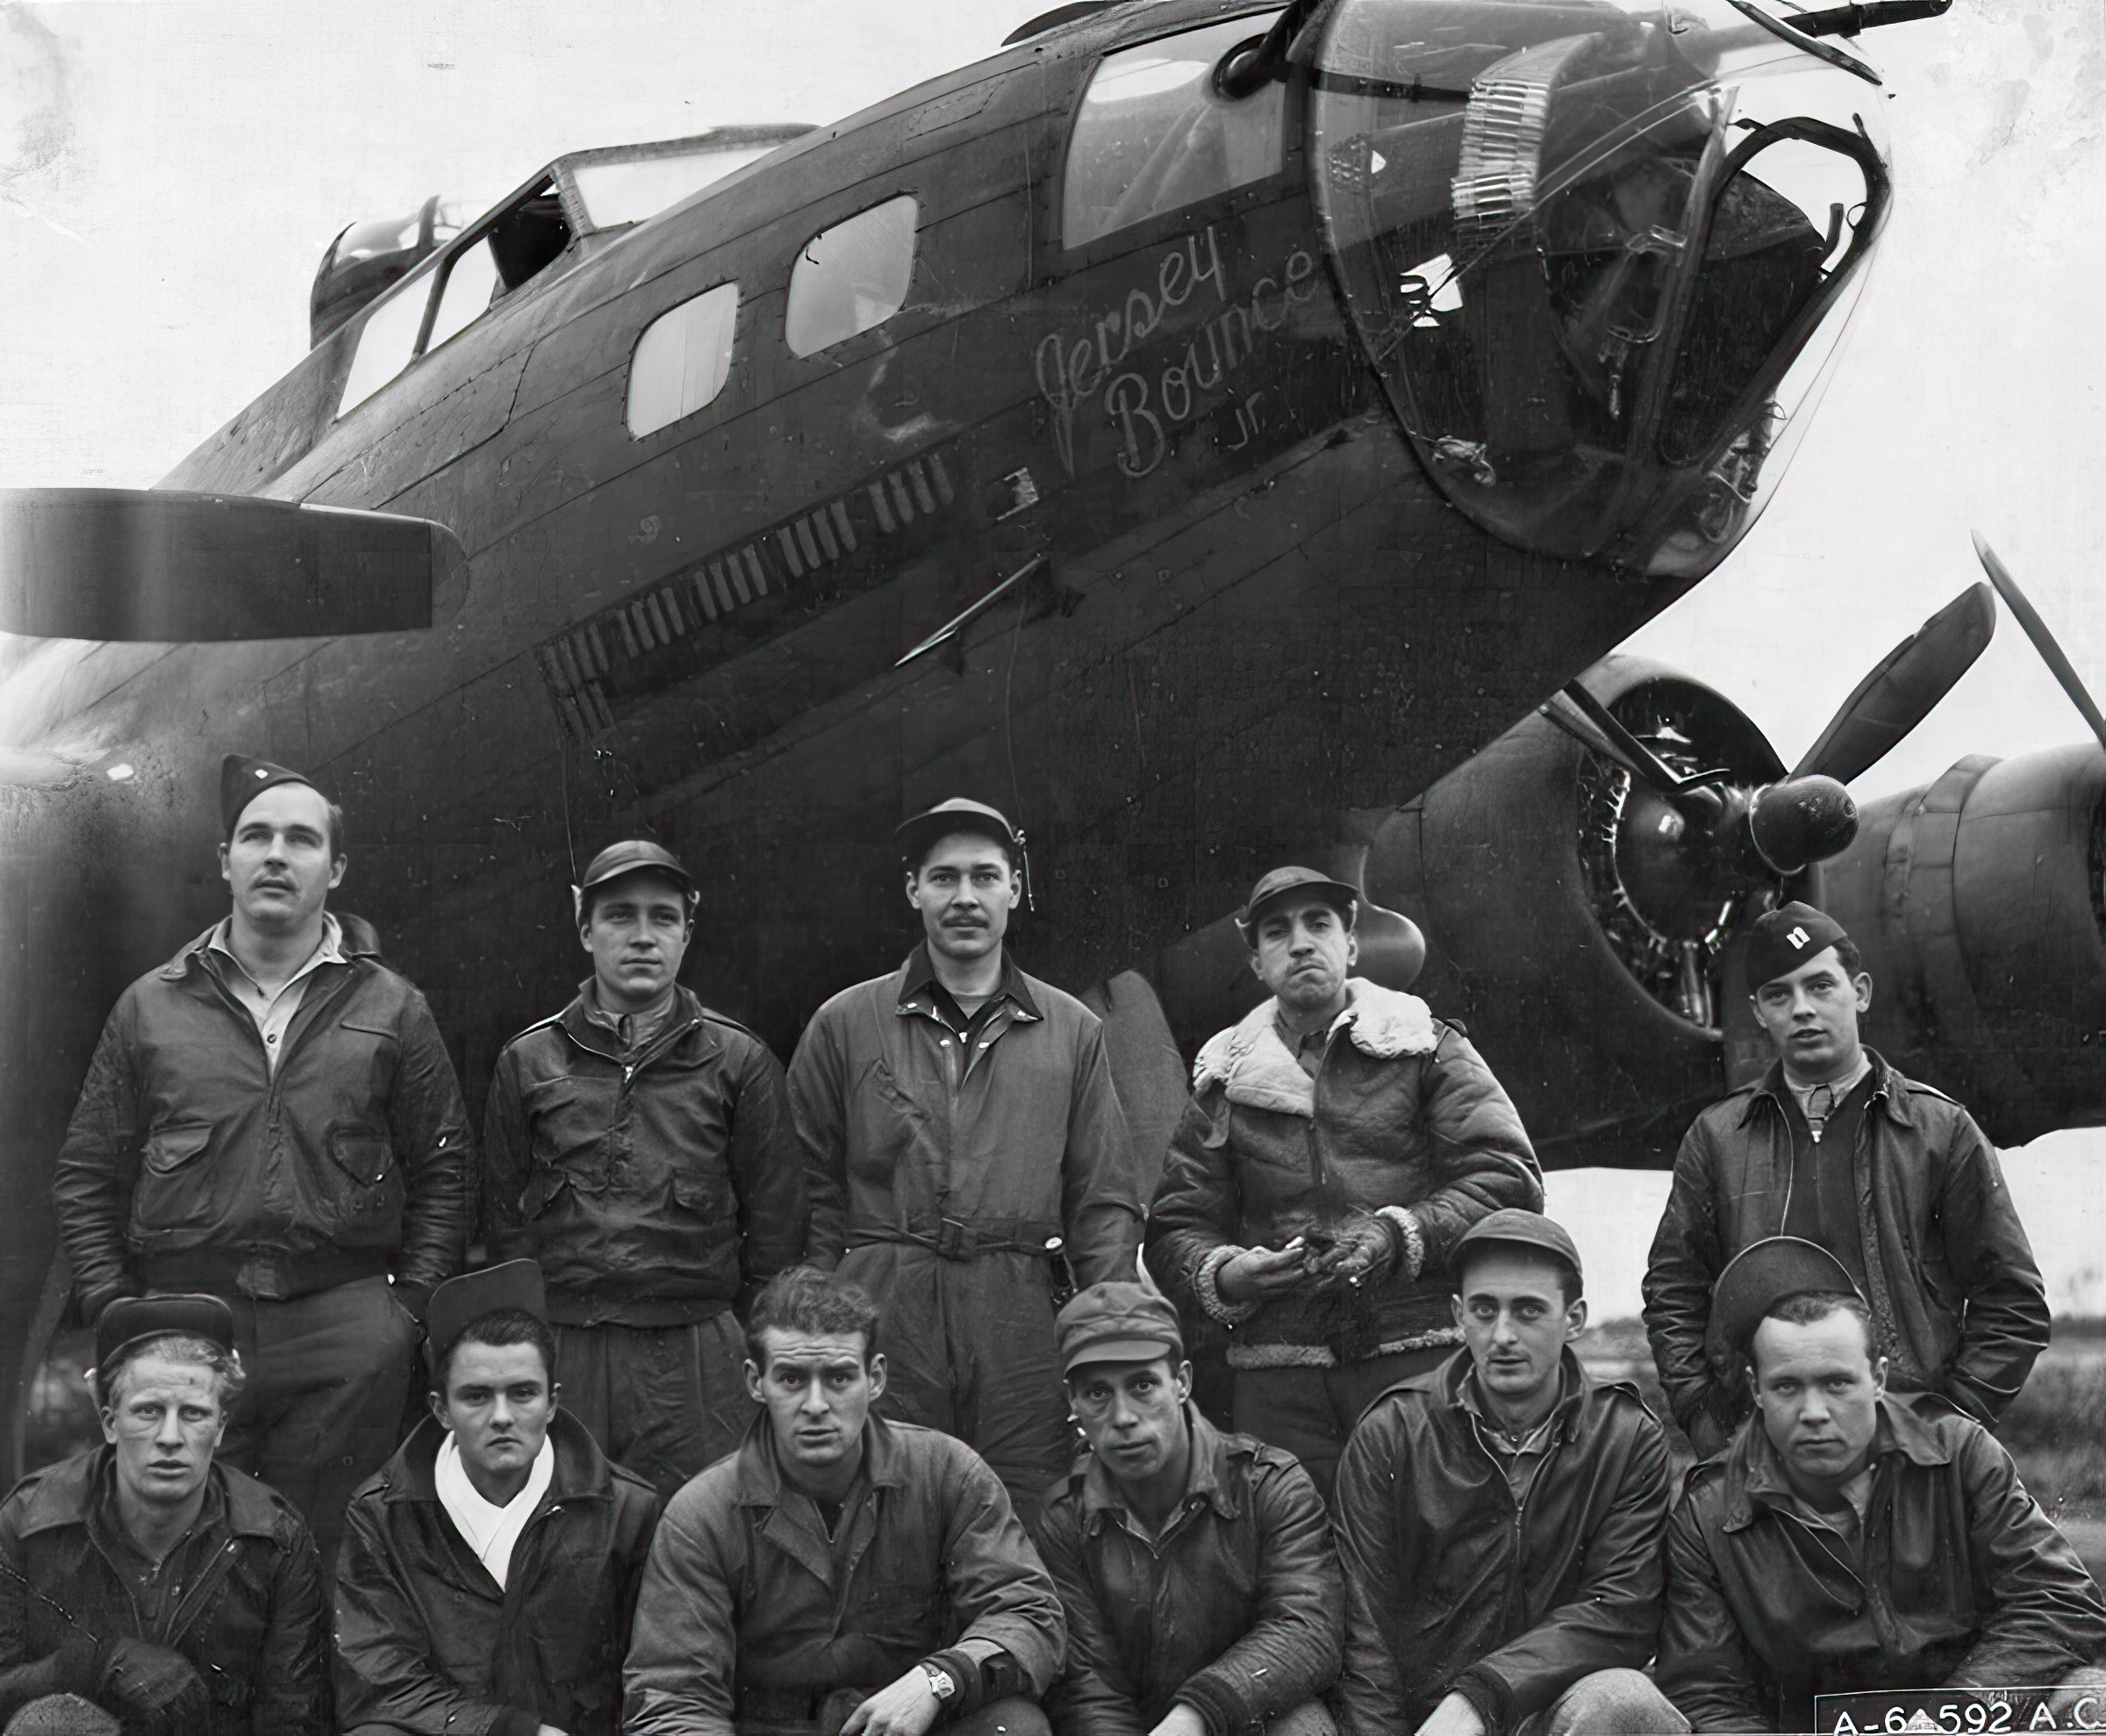 B-17 crew of the Jersey Bounce